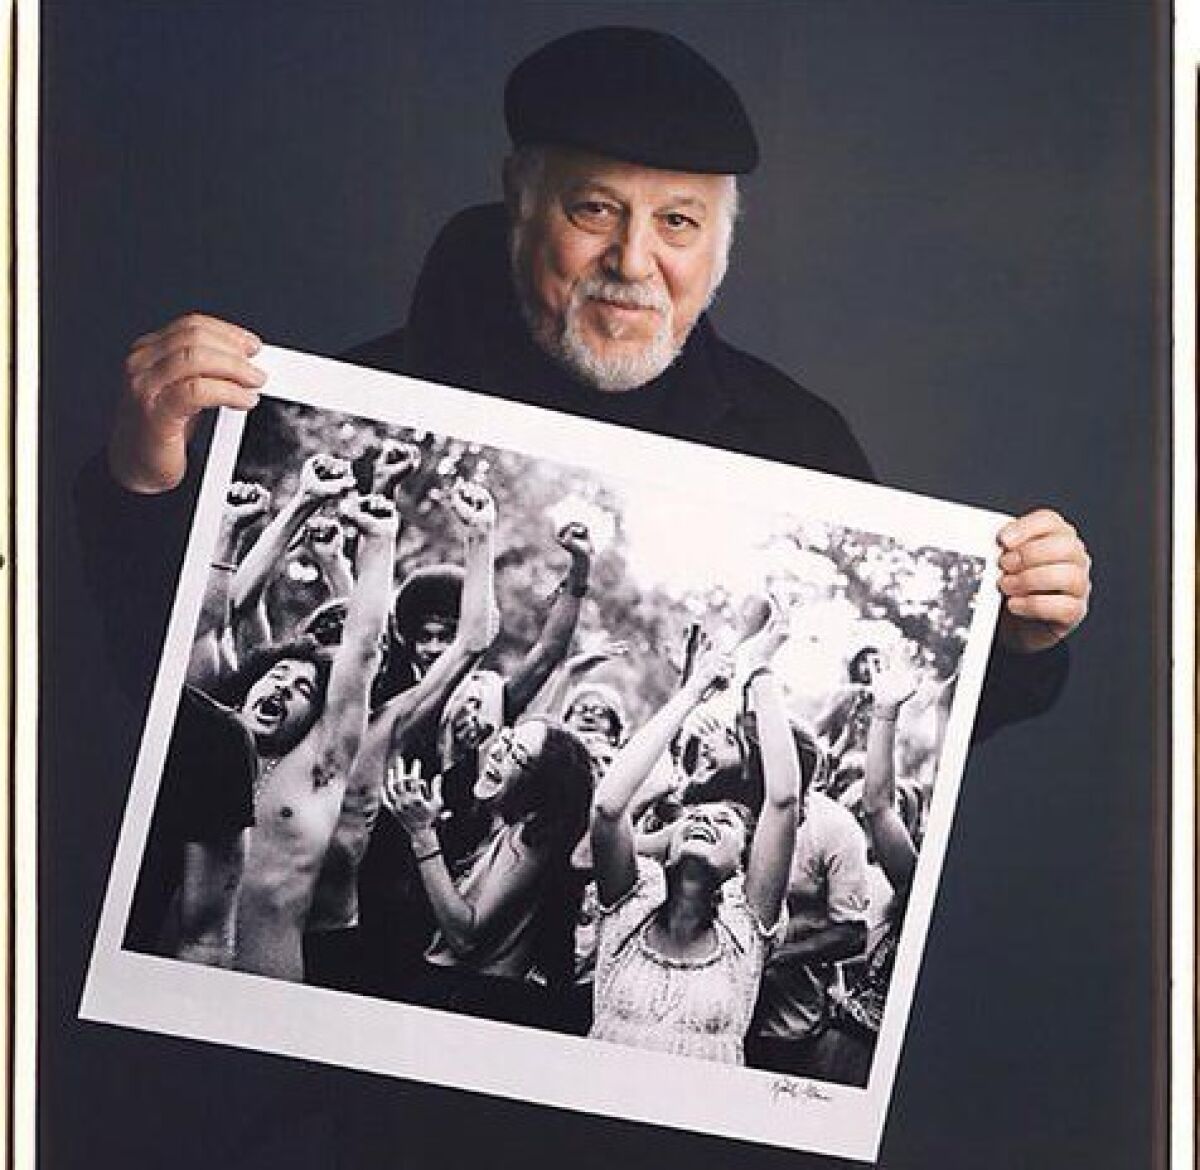 Robert Altman poses with an image from his book 'The Sixties: Photographs.'